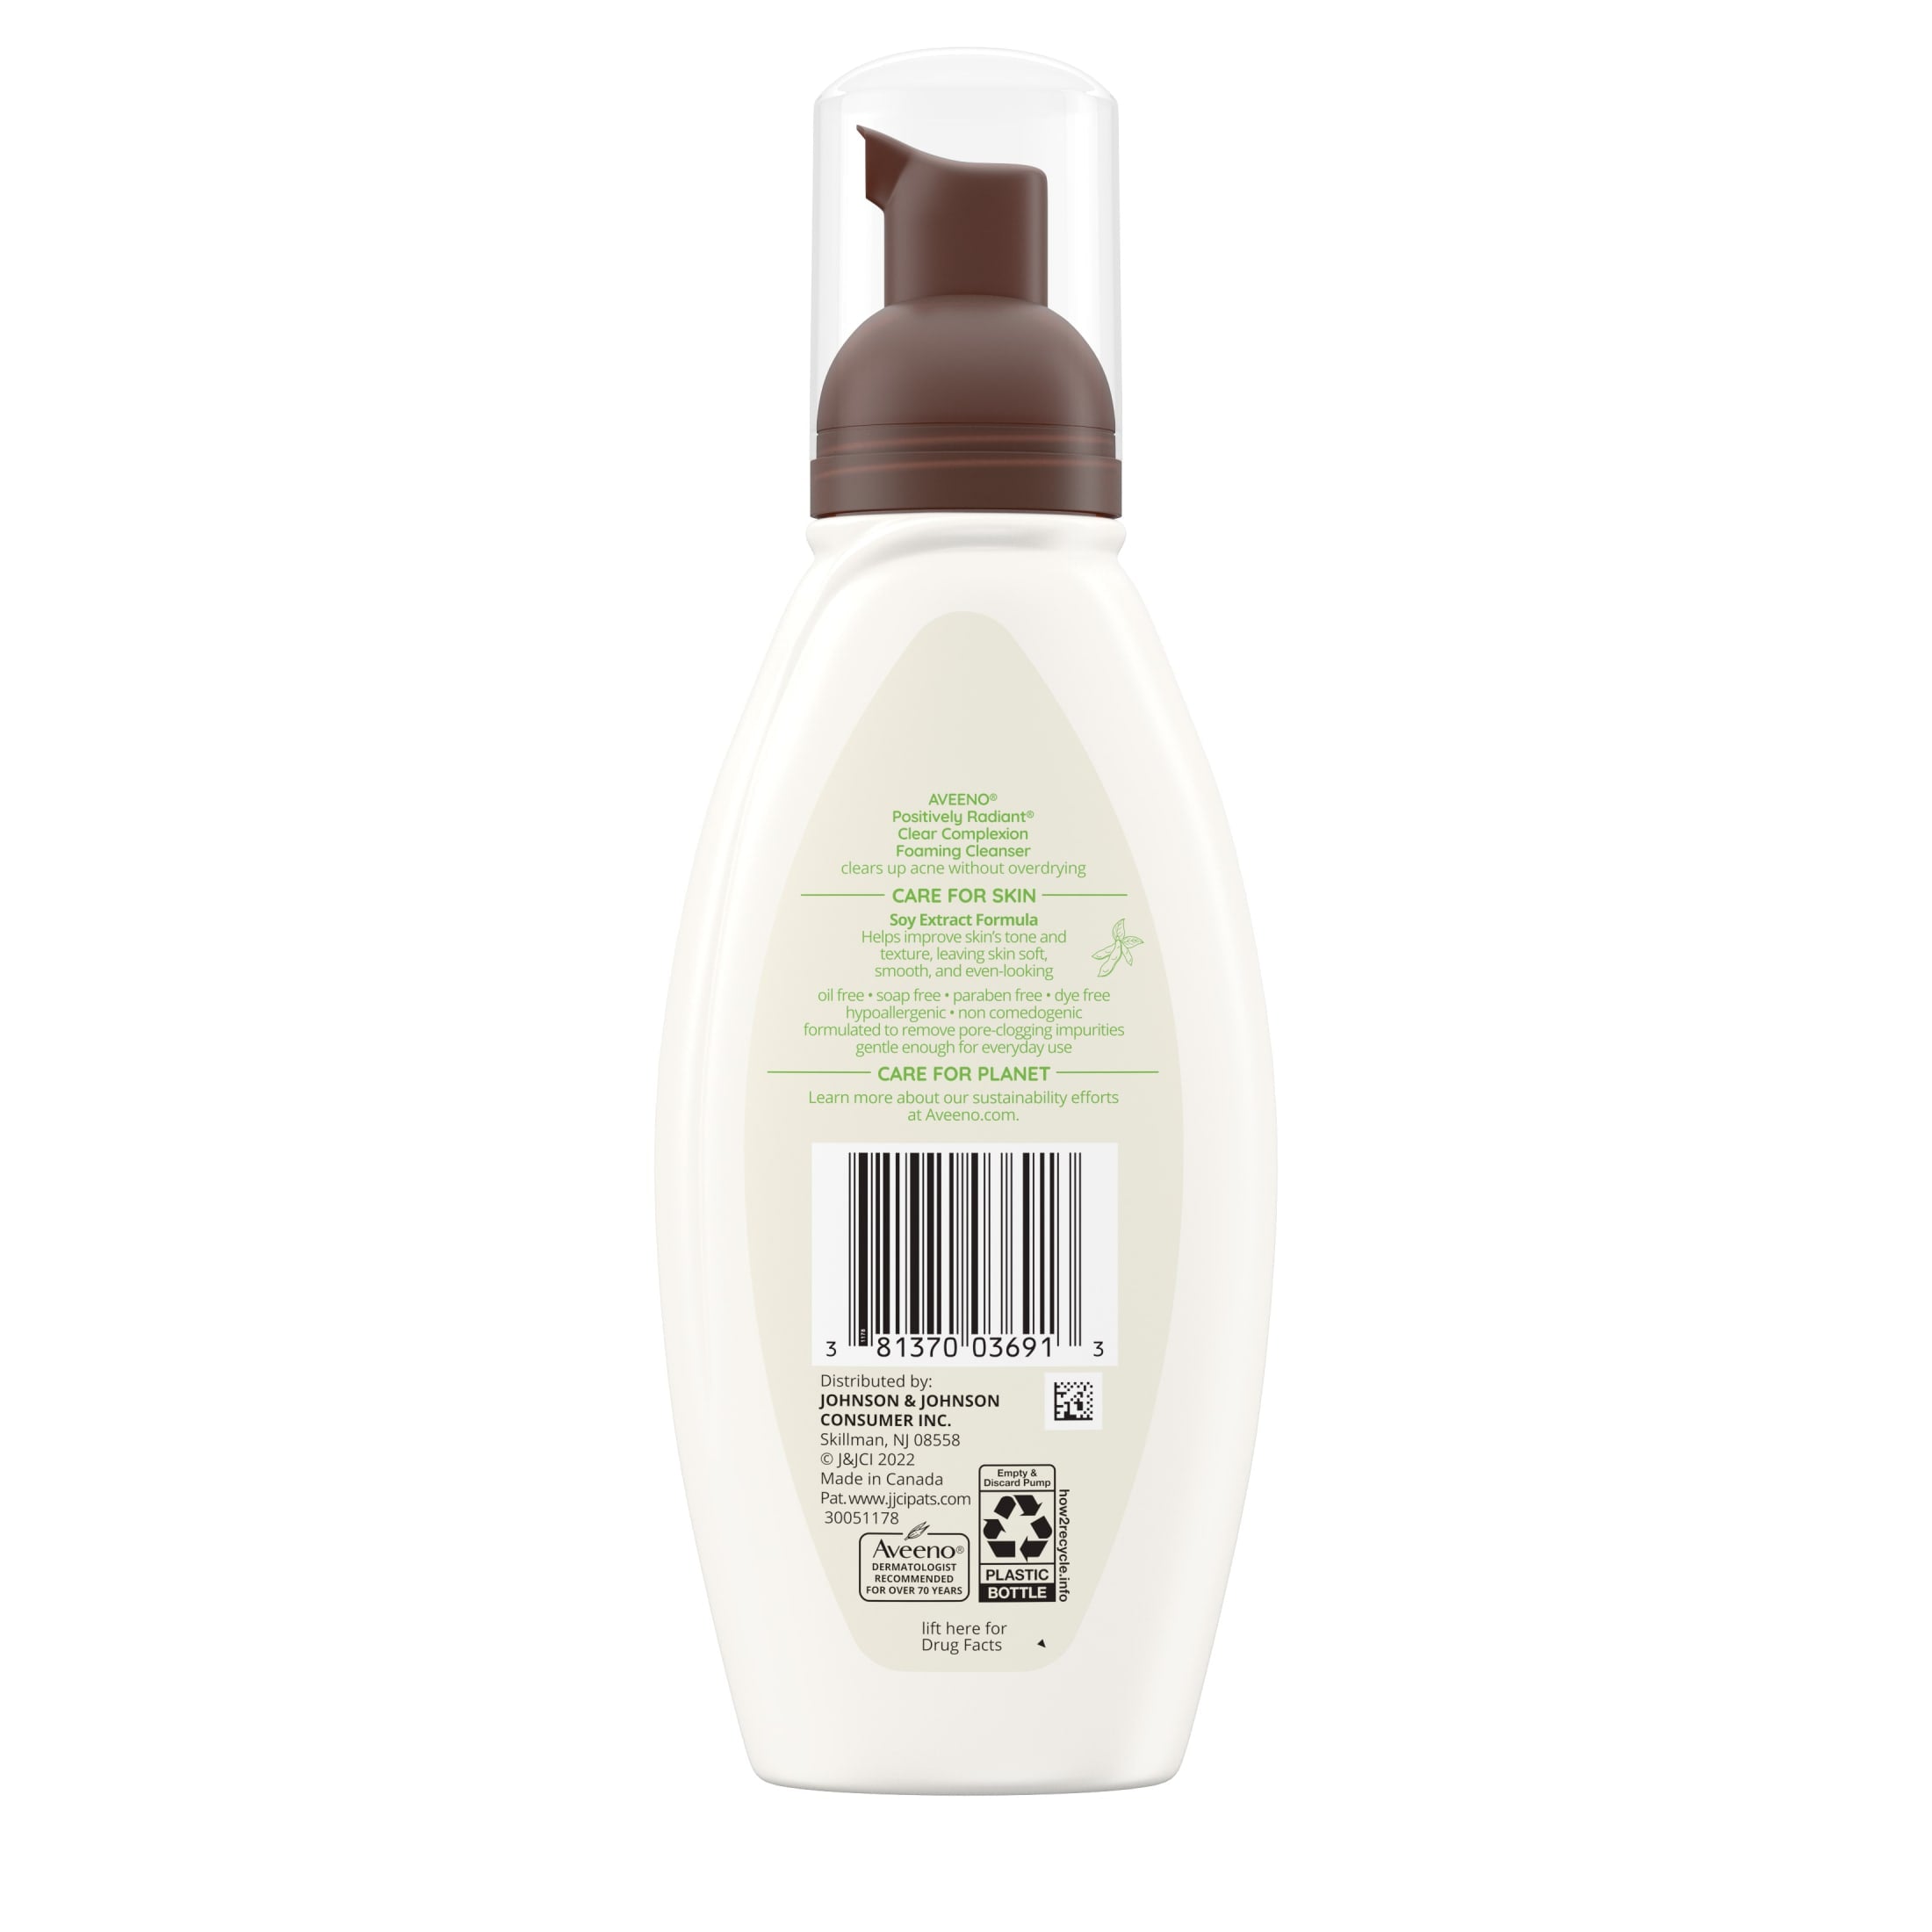 Aveeno Clear Complexion Foaming Facial Cleanser, Oil-Free Acne Face Wash, 6 fl. oz | MTTS374